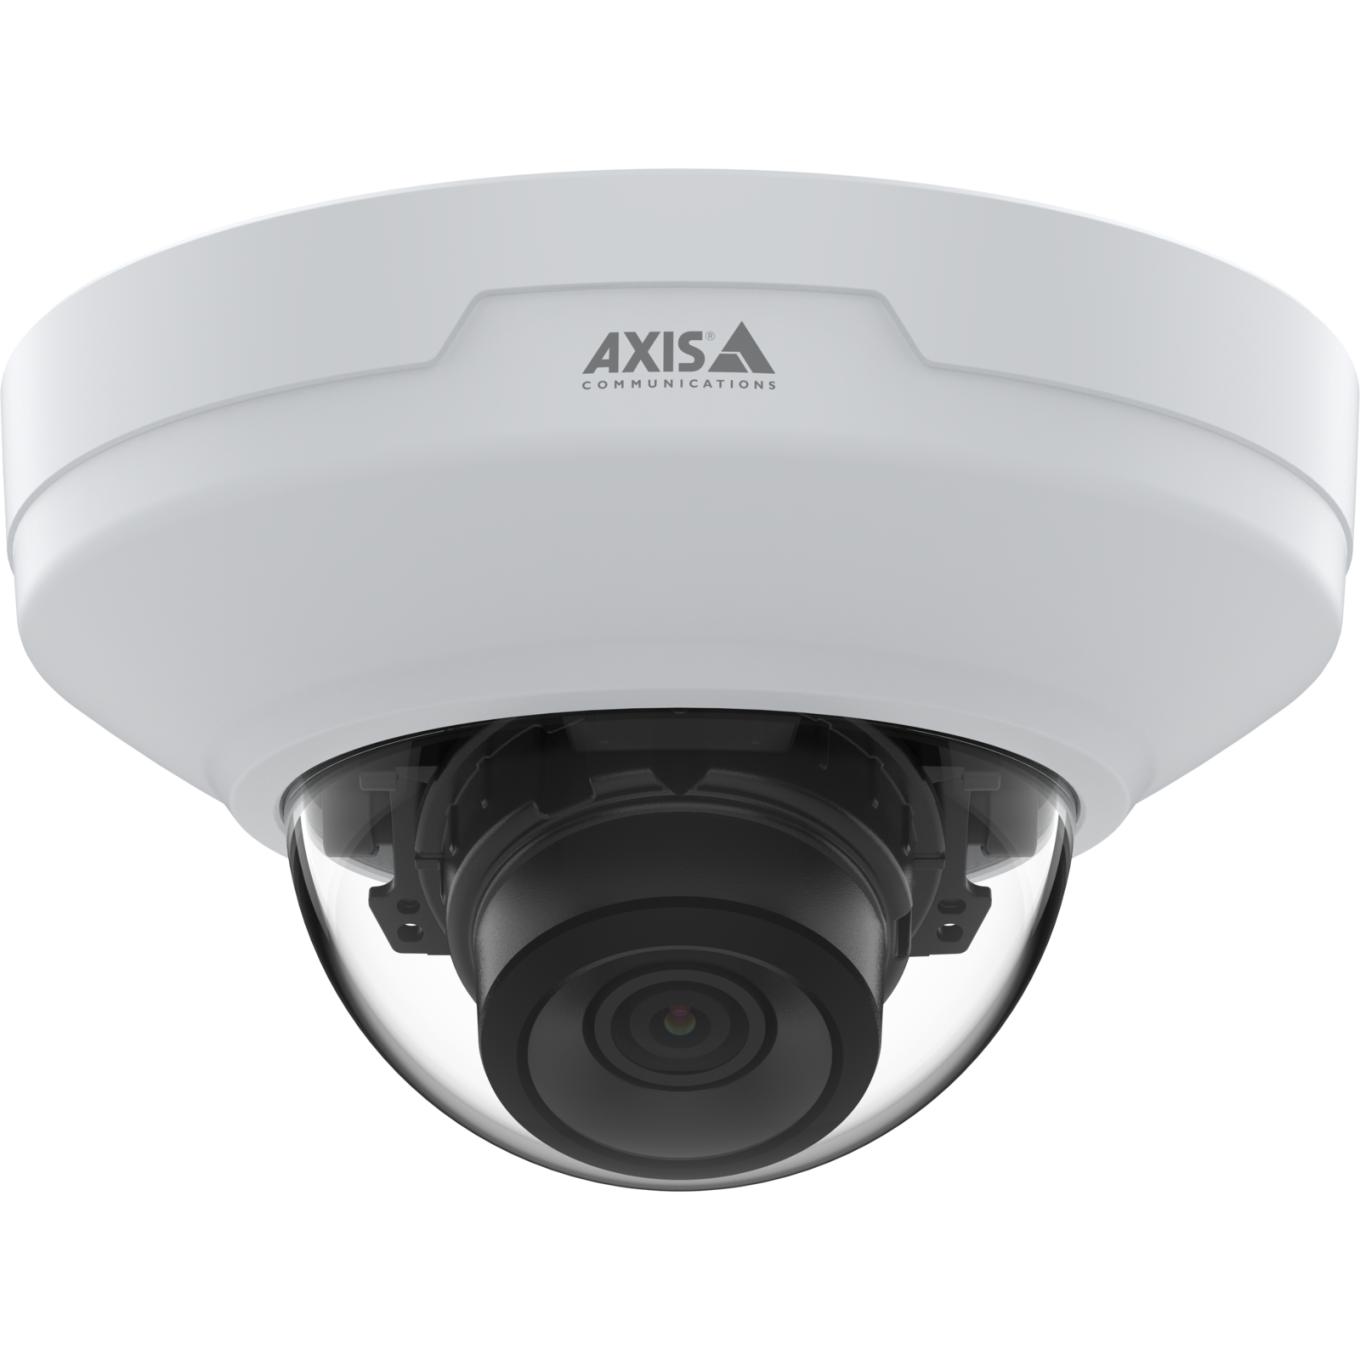 AXIS M4215-LV Dome Camera, viewed from its front